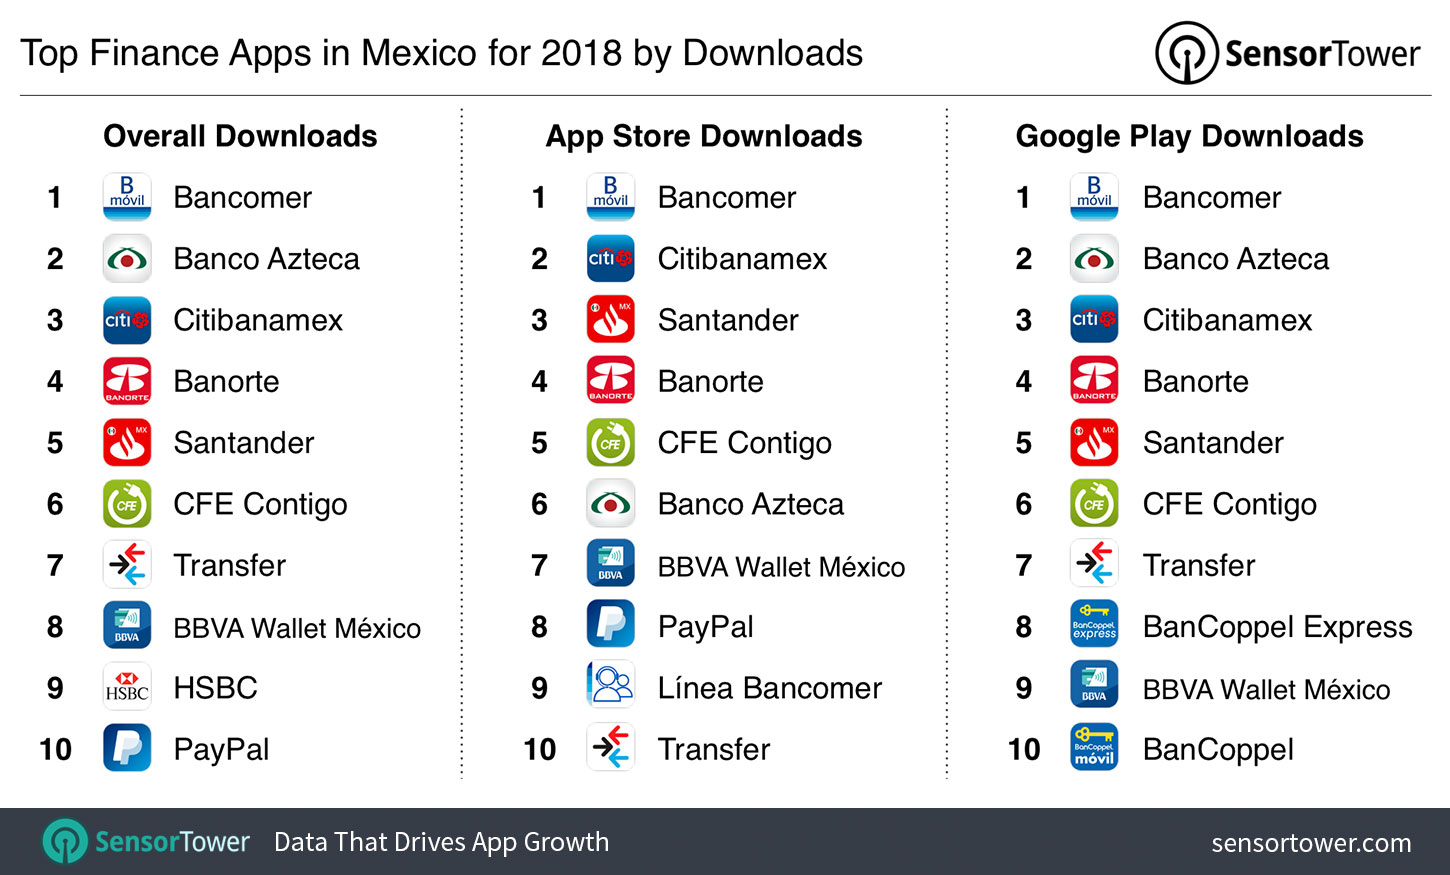 Top Finance Apps in Mexico for 2018 by Downloads